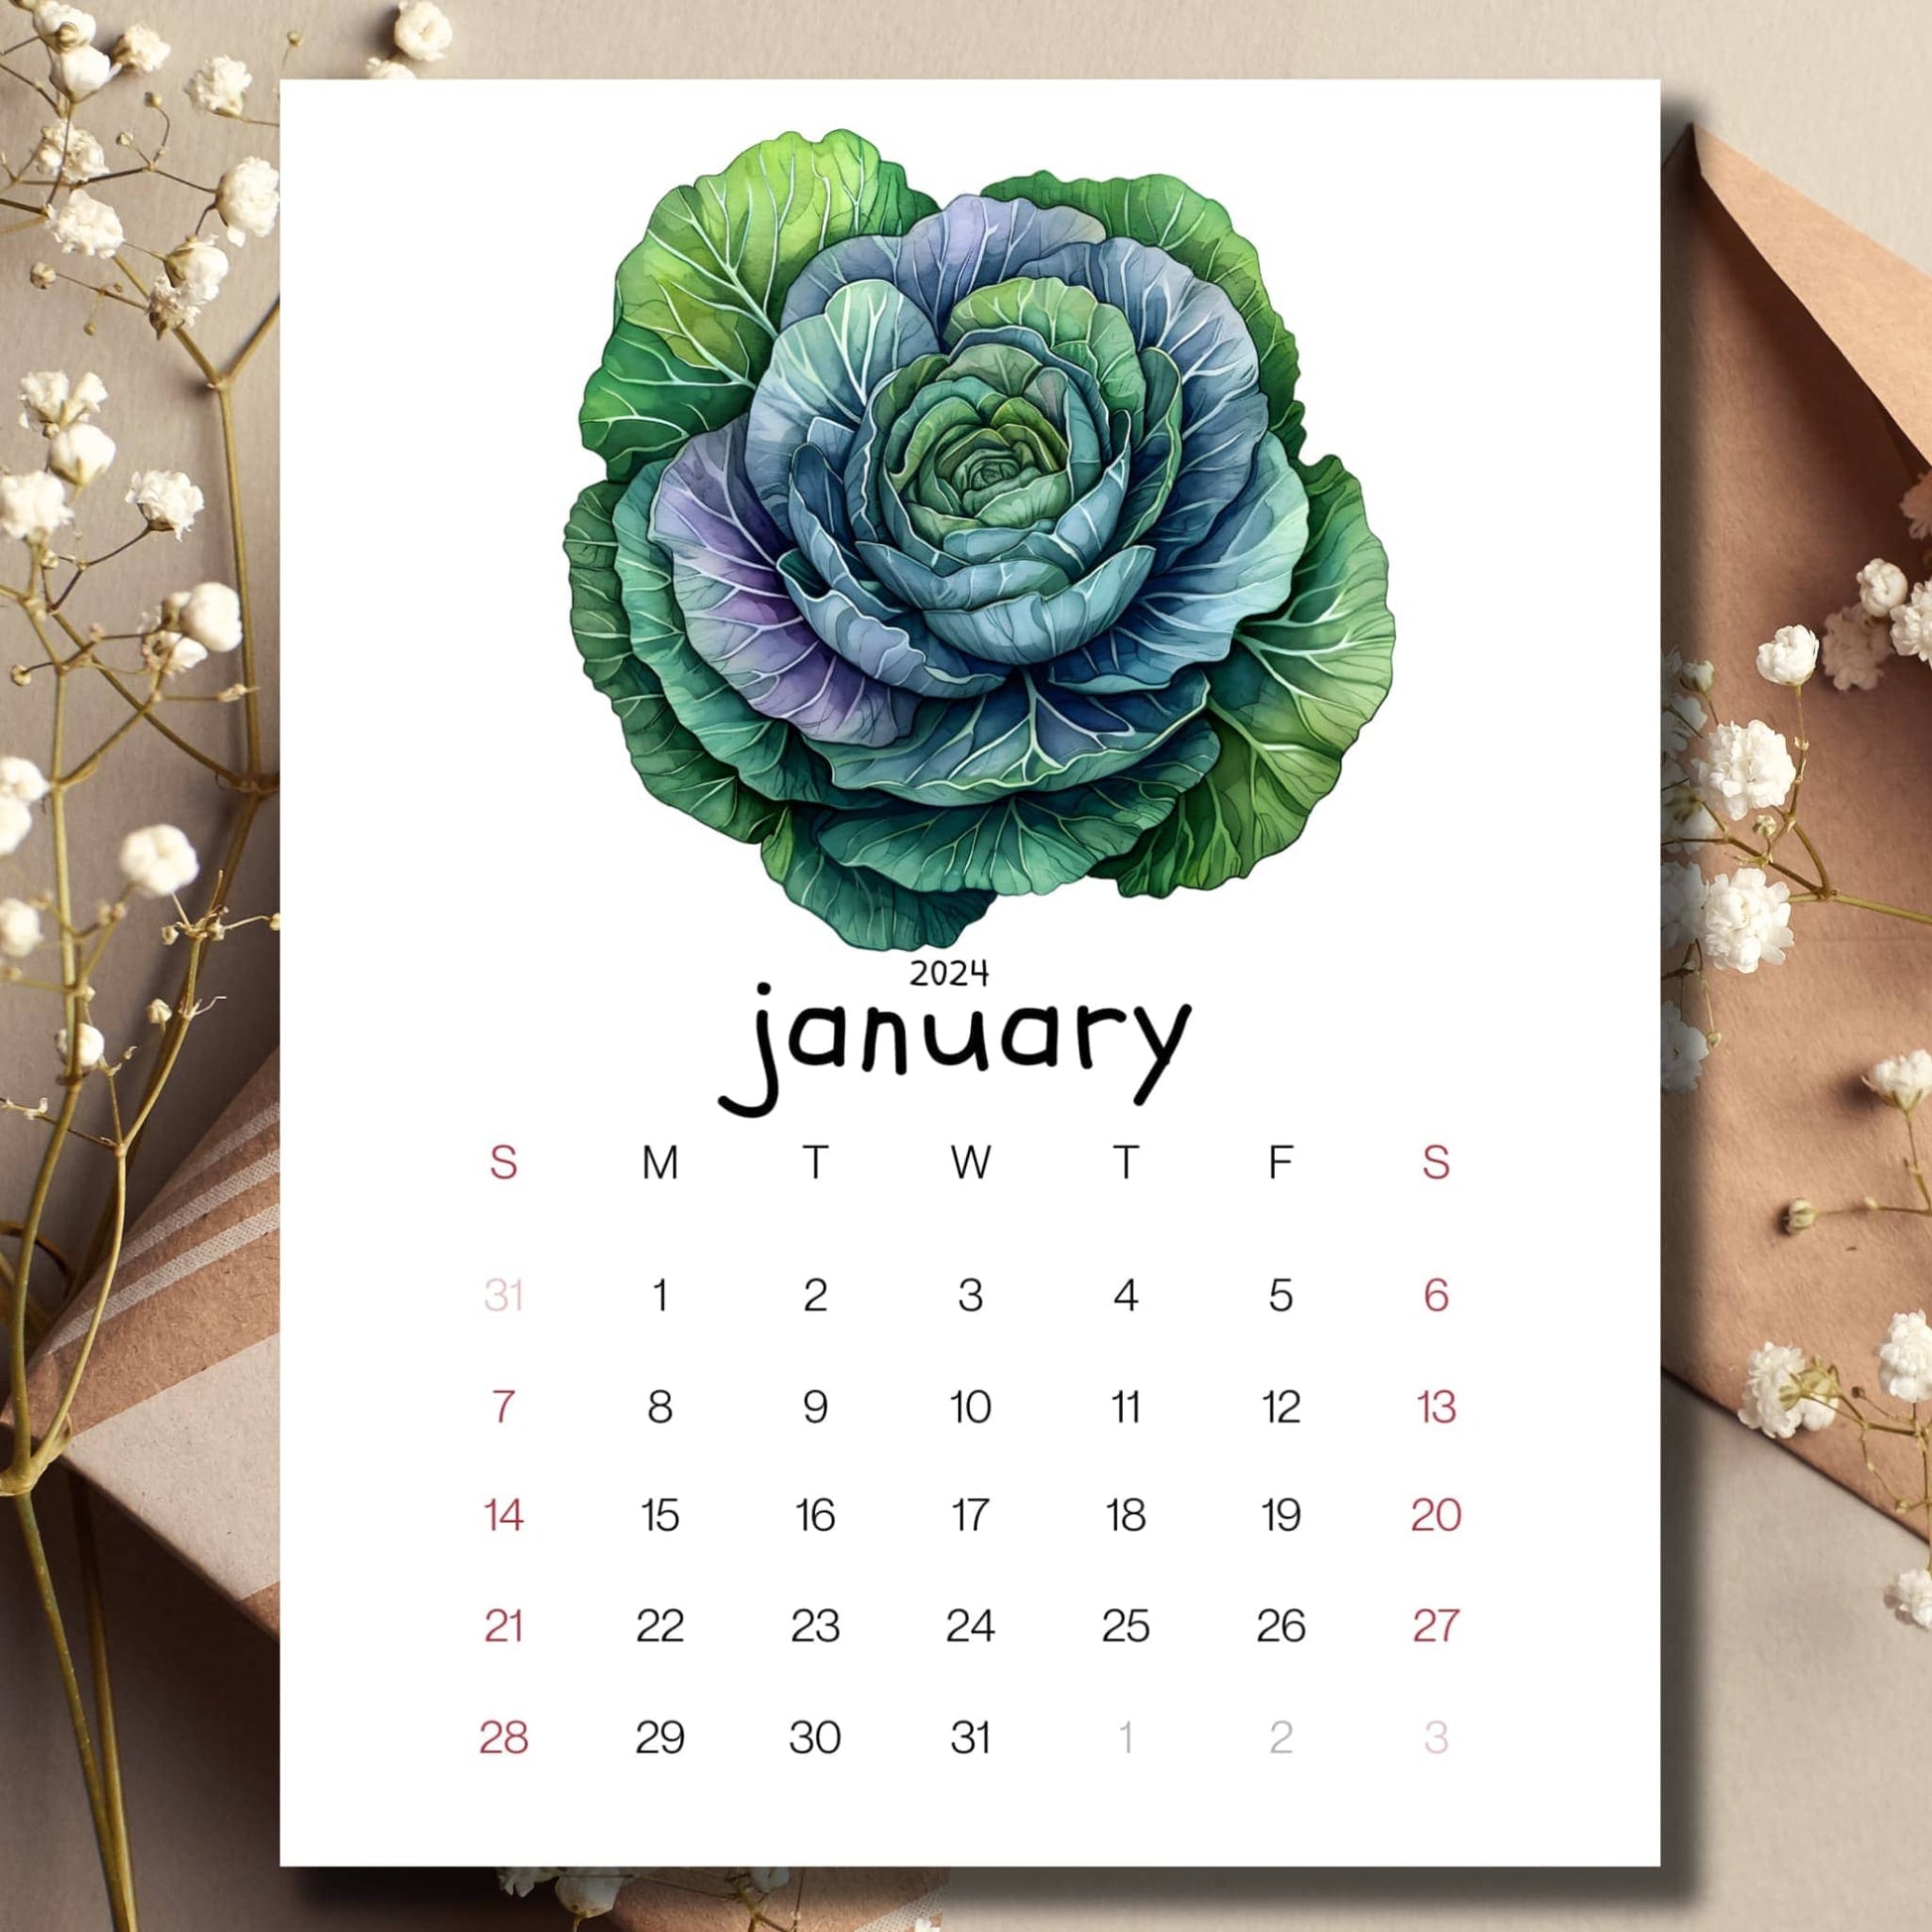 Ornamental cabbages January 2024 full year calendar displayed on a table with an envelope and small white flowers in the background.